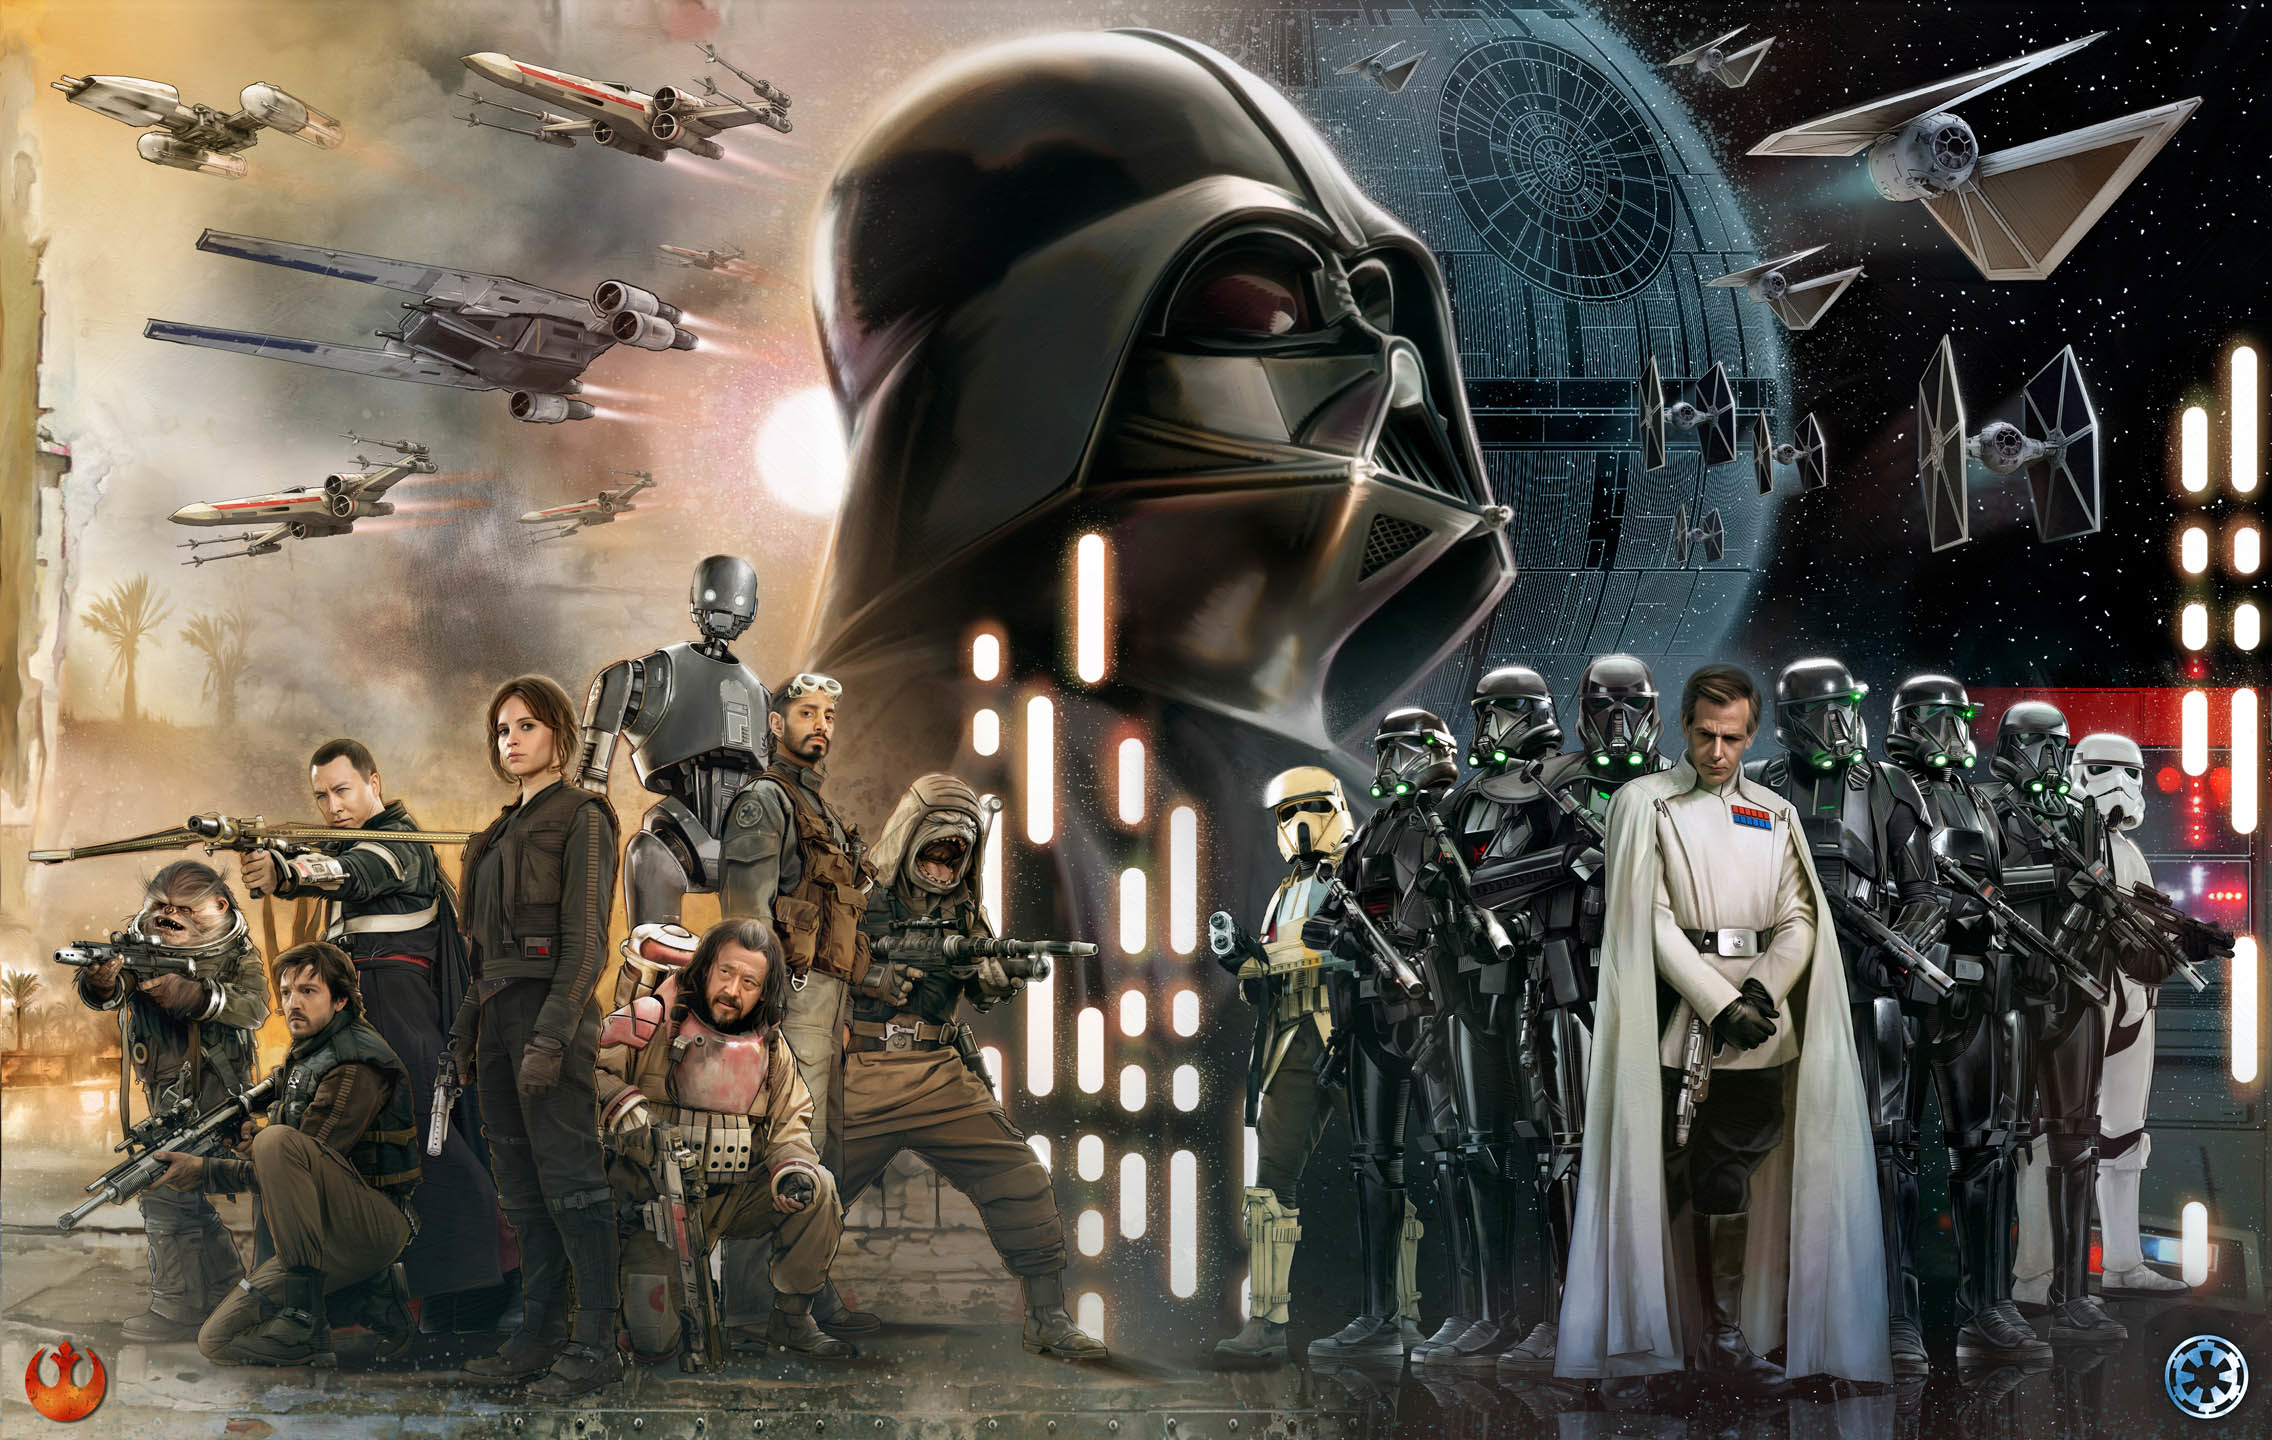 rogue one a star wars story cast